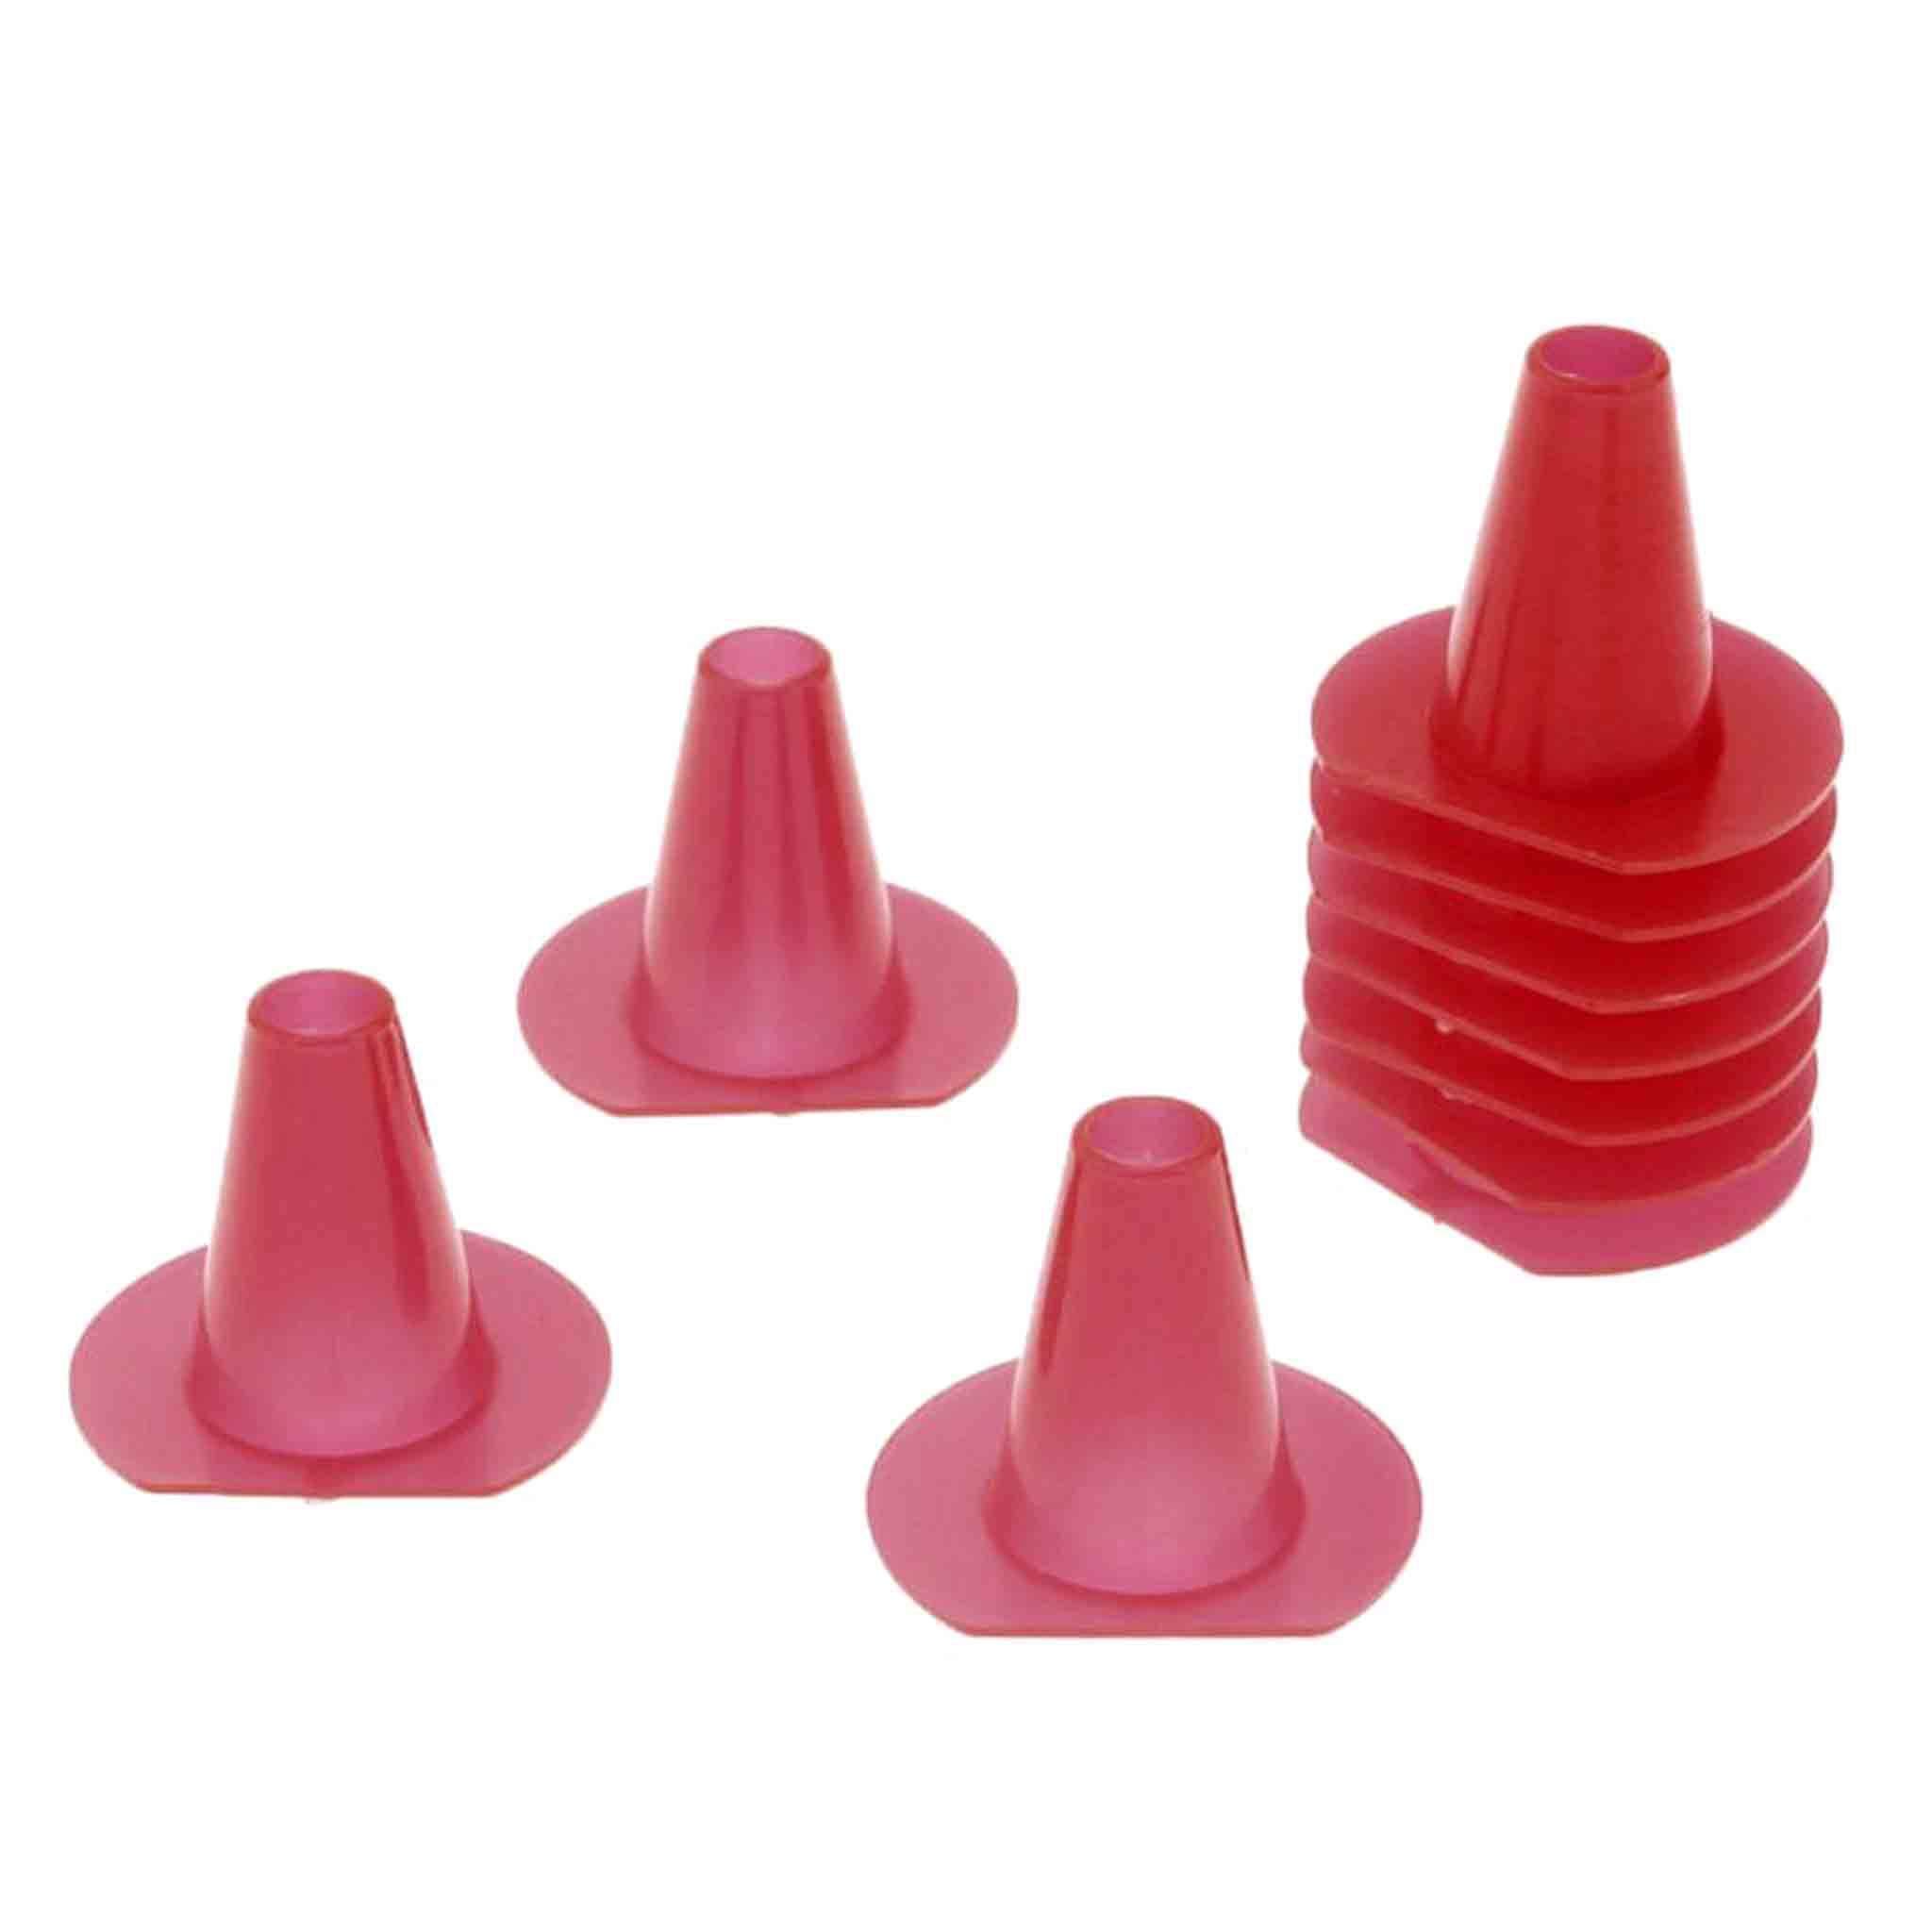 Conical Bee Escape Cones - Red Plastic - 10 Pack - Accessories collection by Buzzbee Beekeeping Supplies